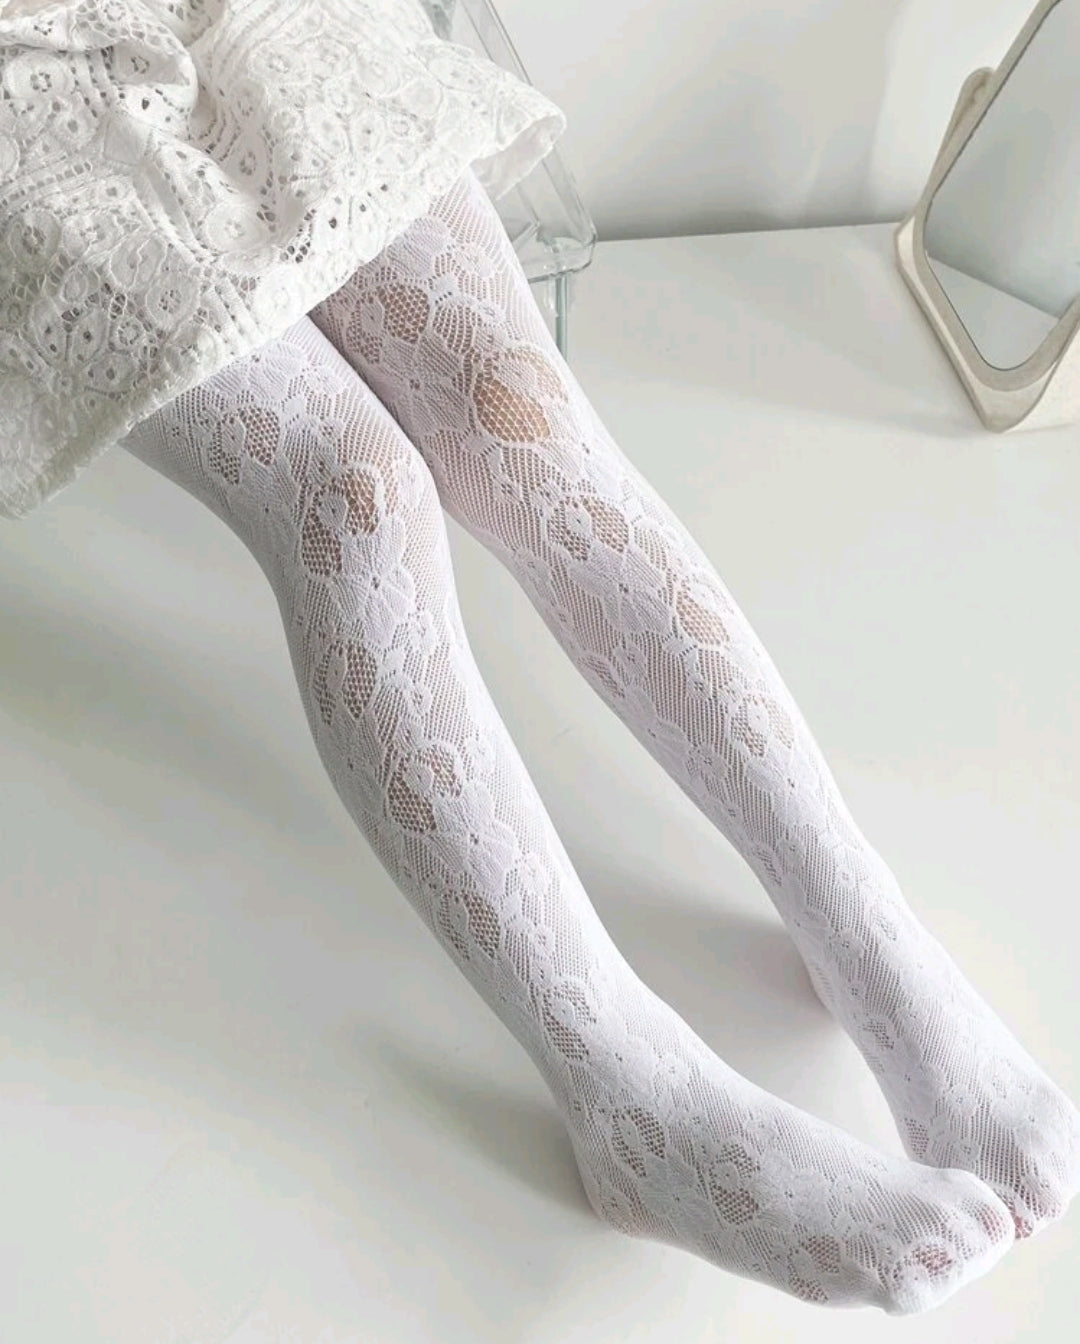 Floral tights